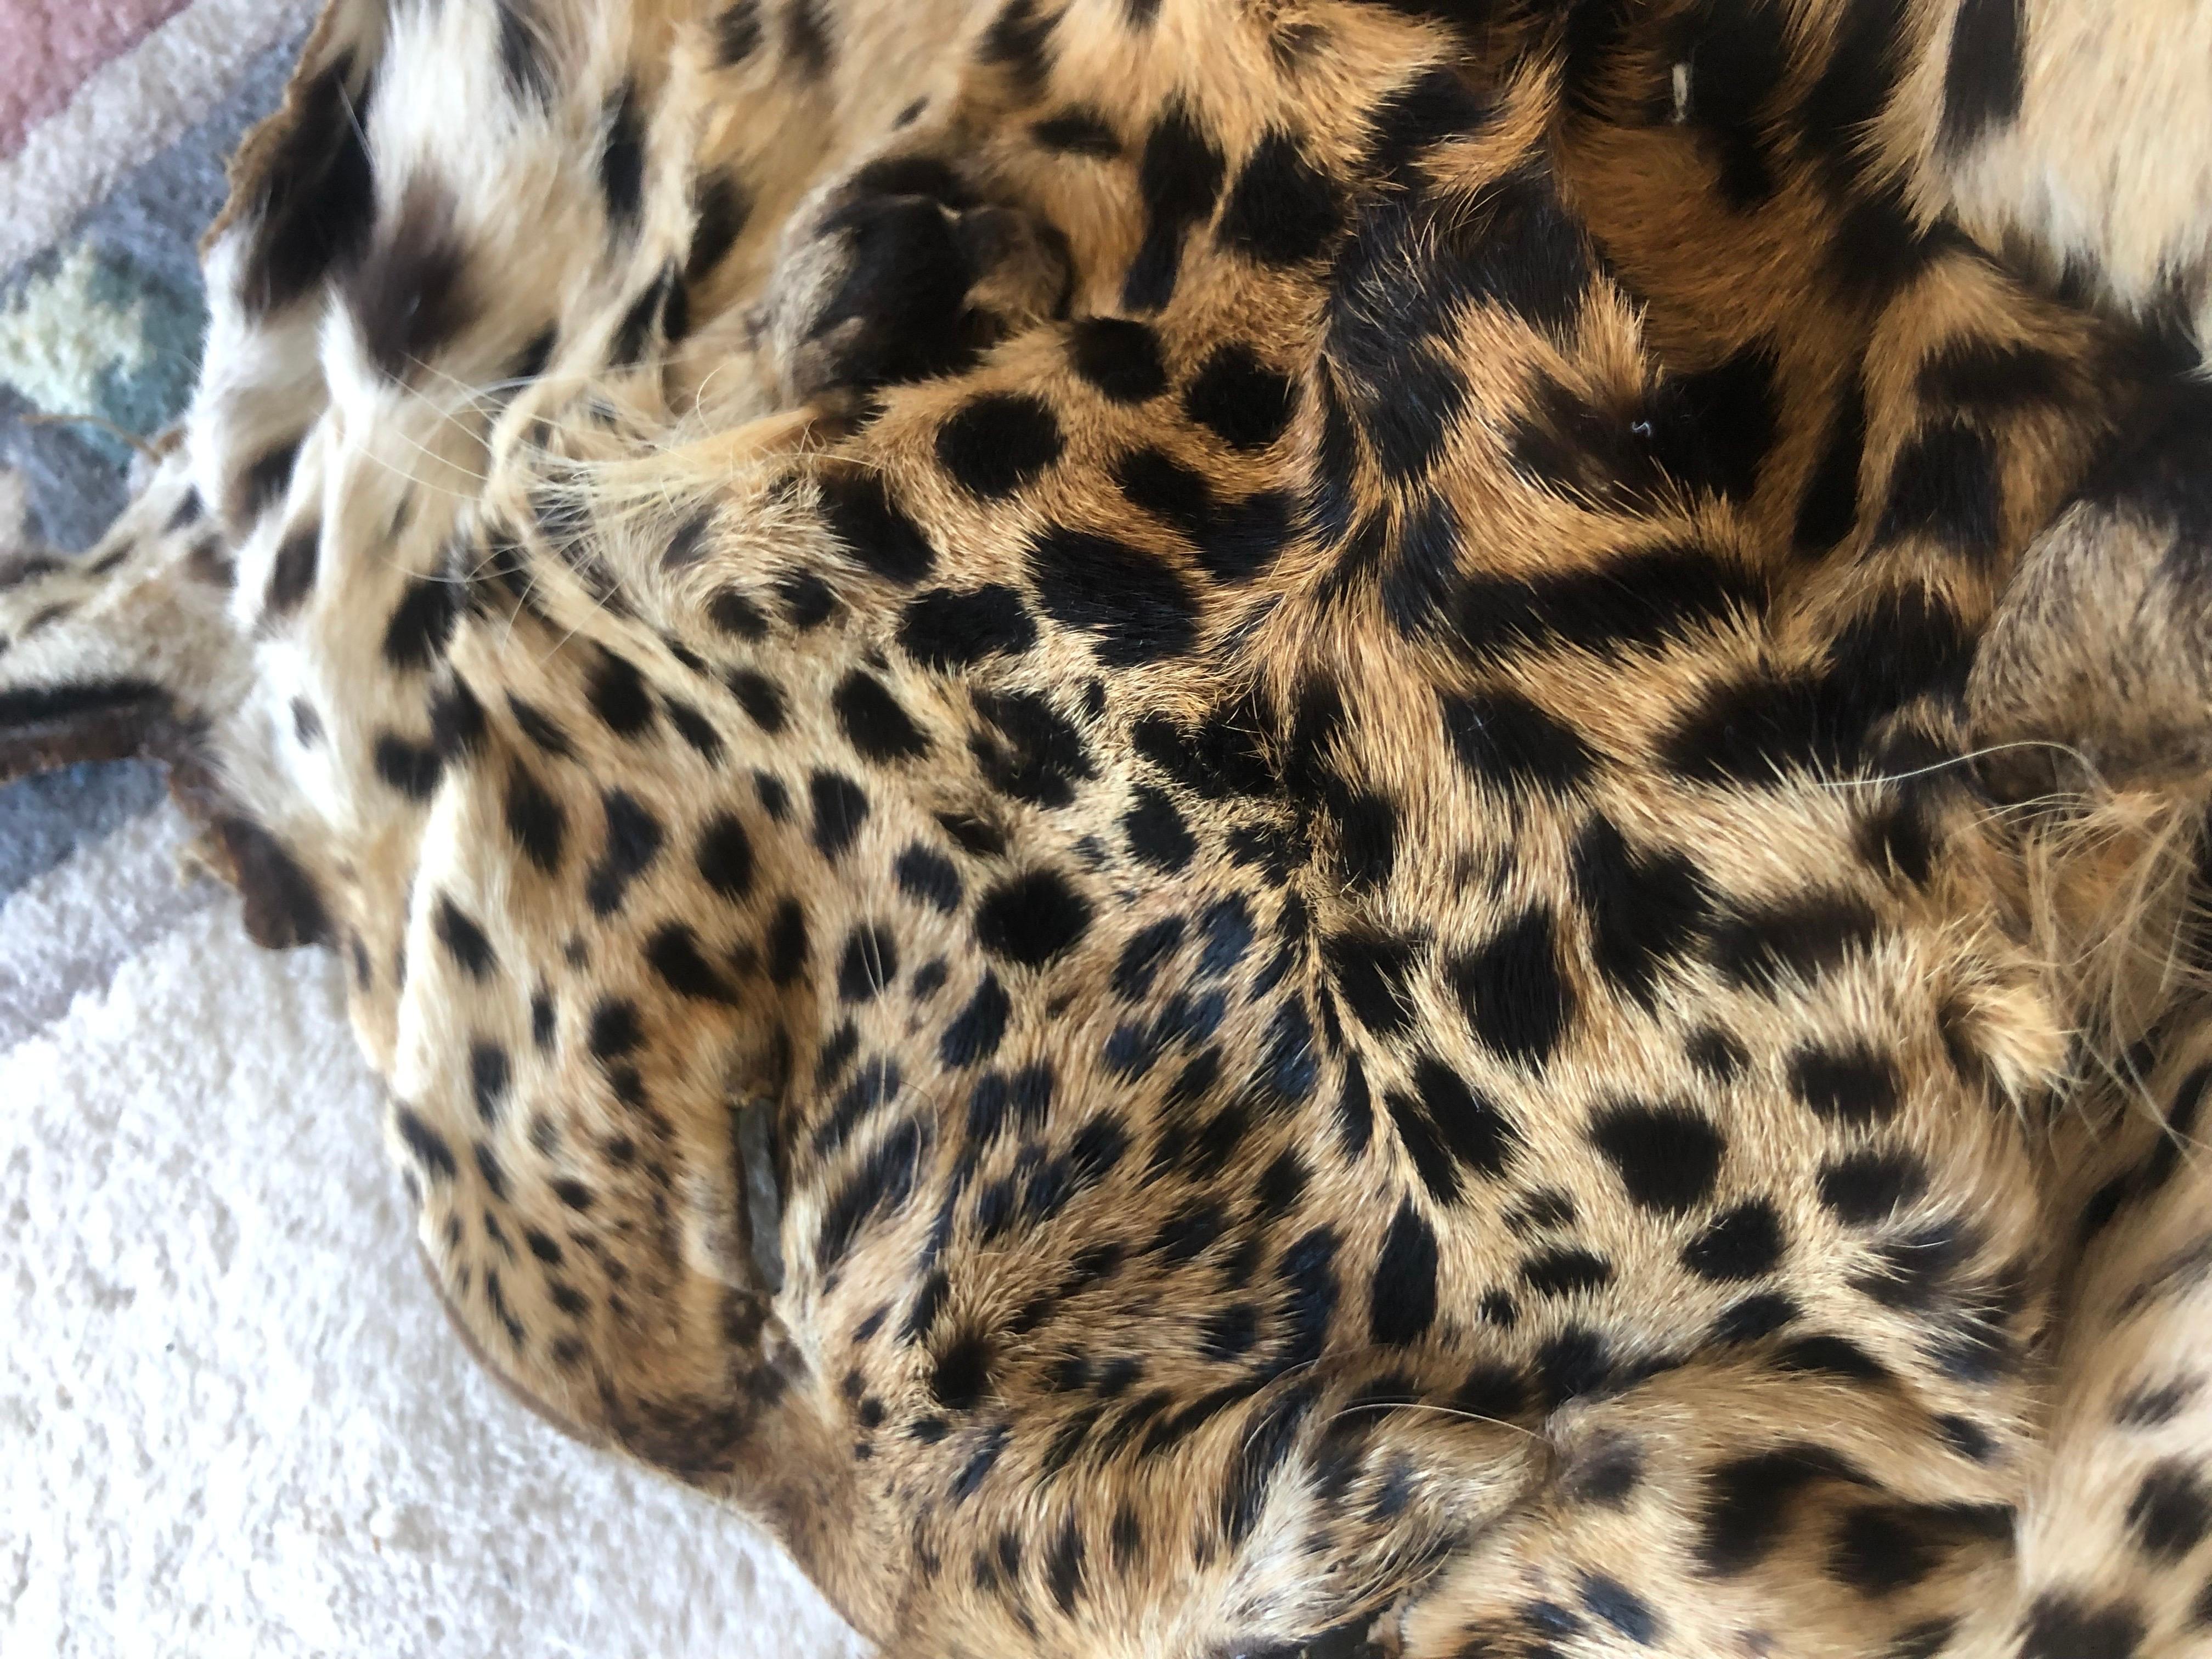 Pieces of leopard fur 
Collar can be finished at clients request the cost is 200$ extra
This is for arts and crafts and projects or as a decoration as is the skins are very supple and malleable soft and fresh 
Hairs are not falling
Great piece for